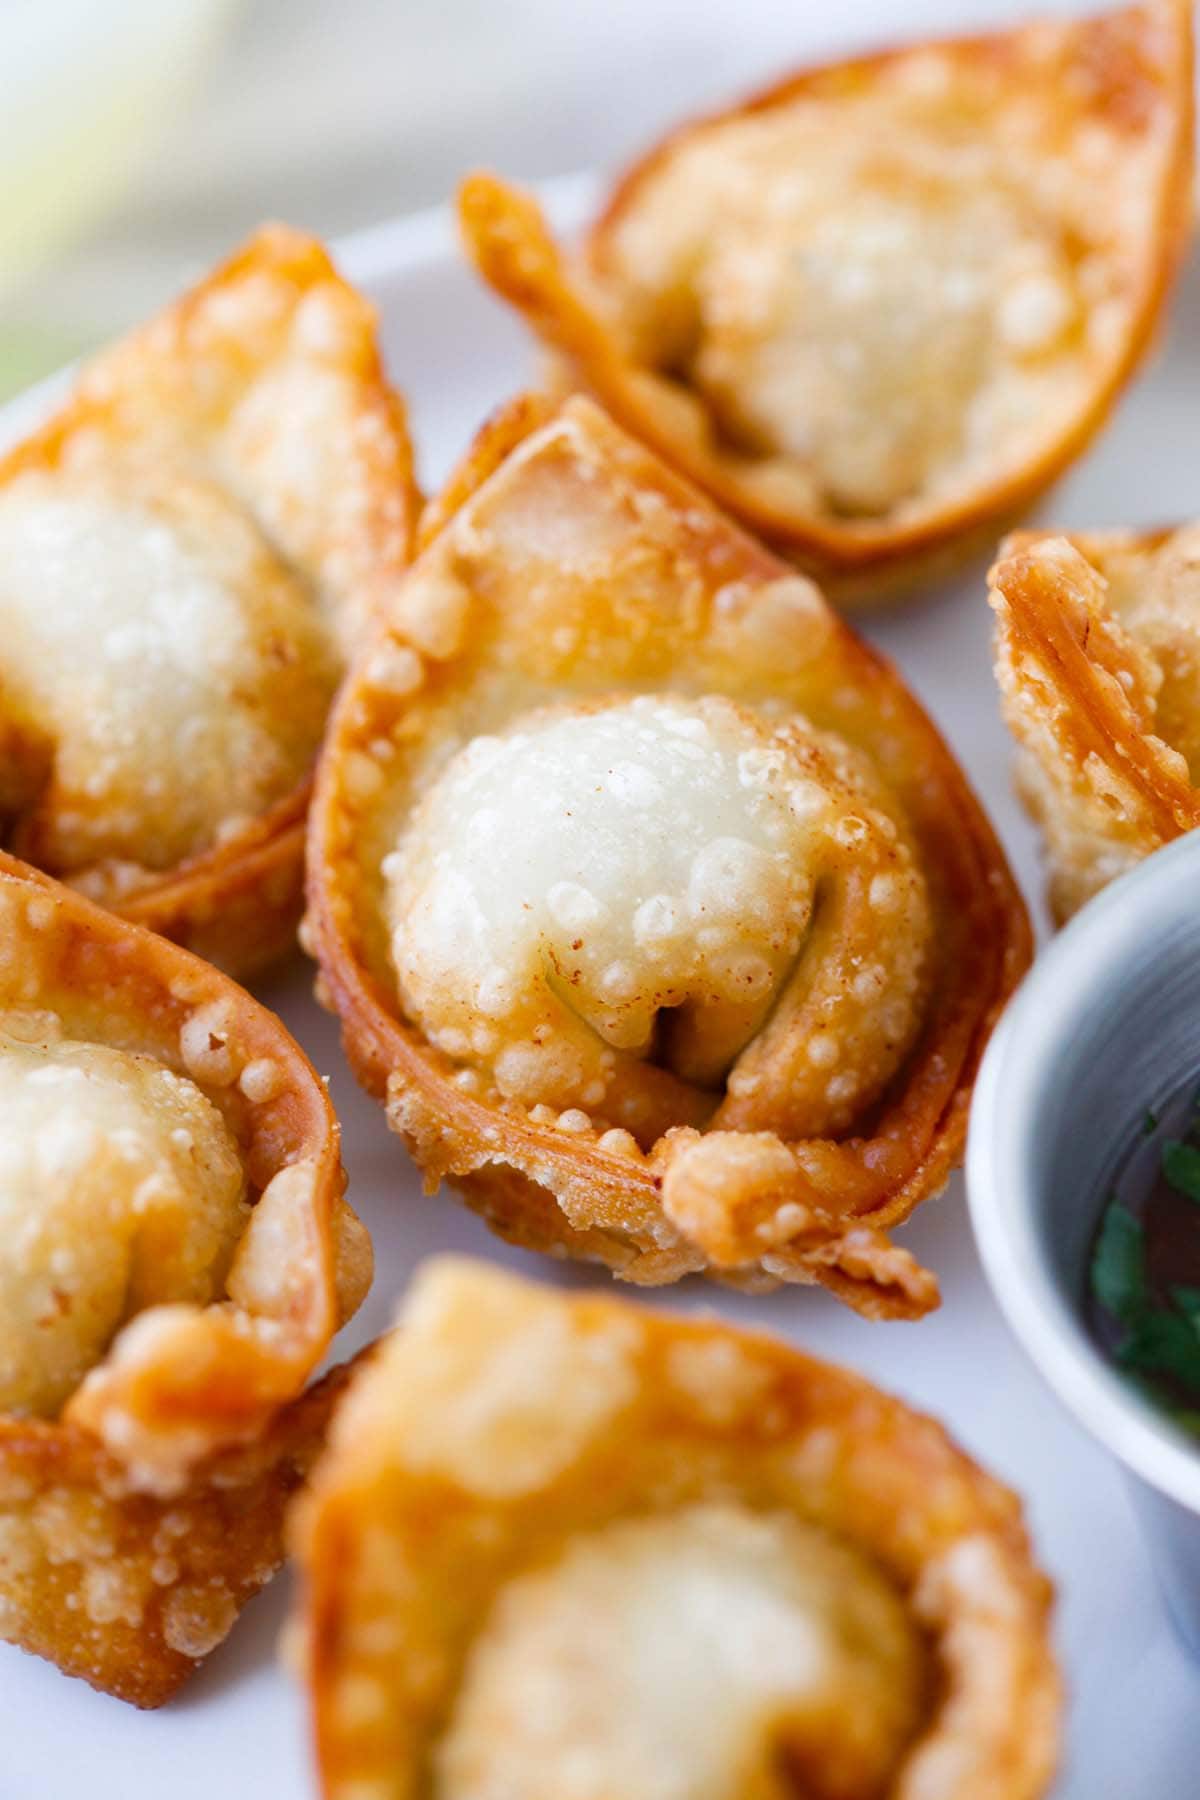 Fried wontons – BEST wontons recipe! Homemade, crispy, simple ingredients. Learn how to make wontons with this easy Chinese recipe | rasamalaysia.com